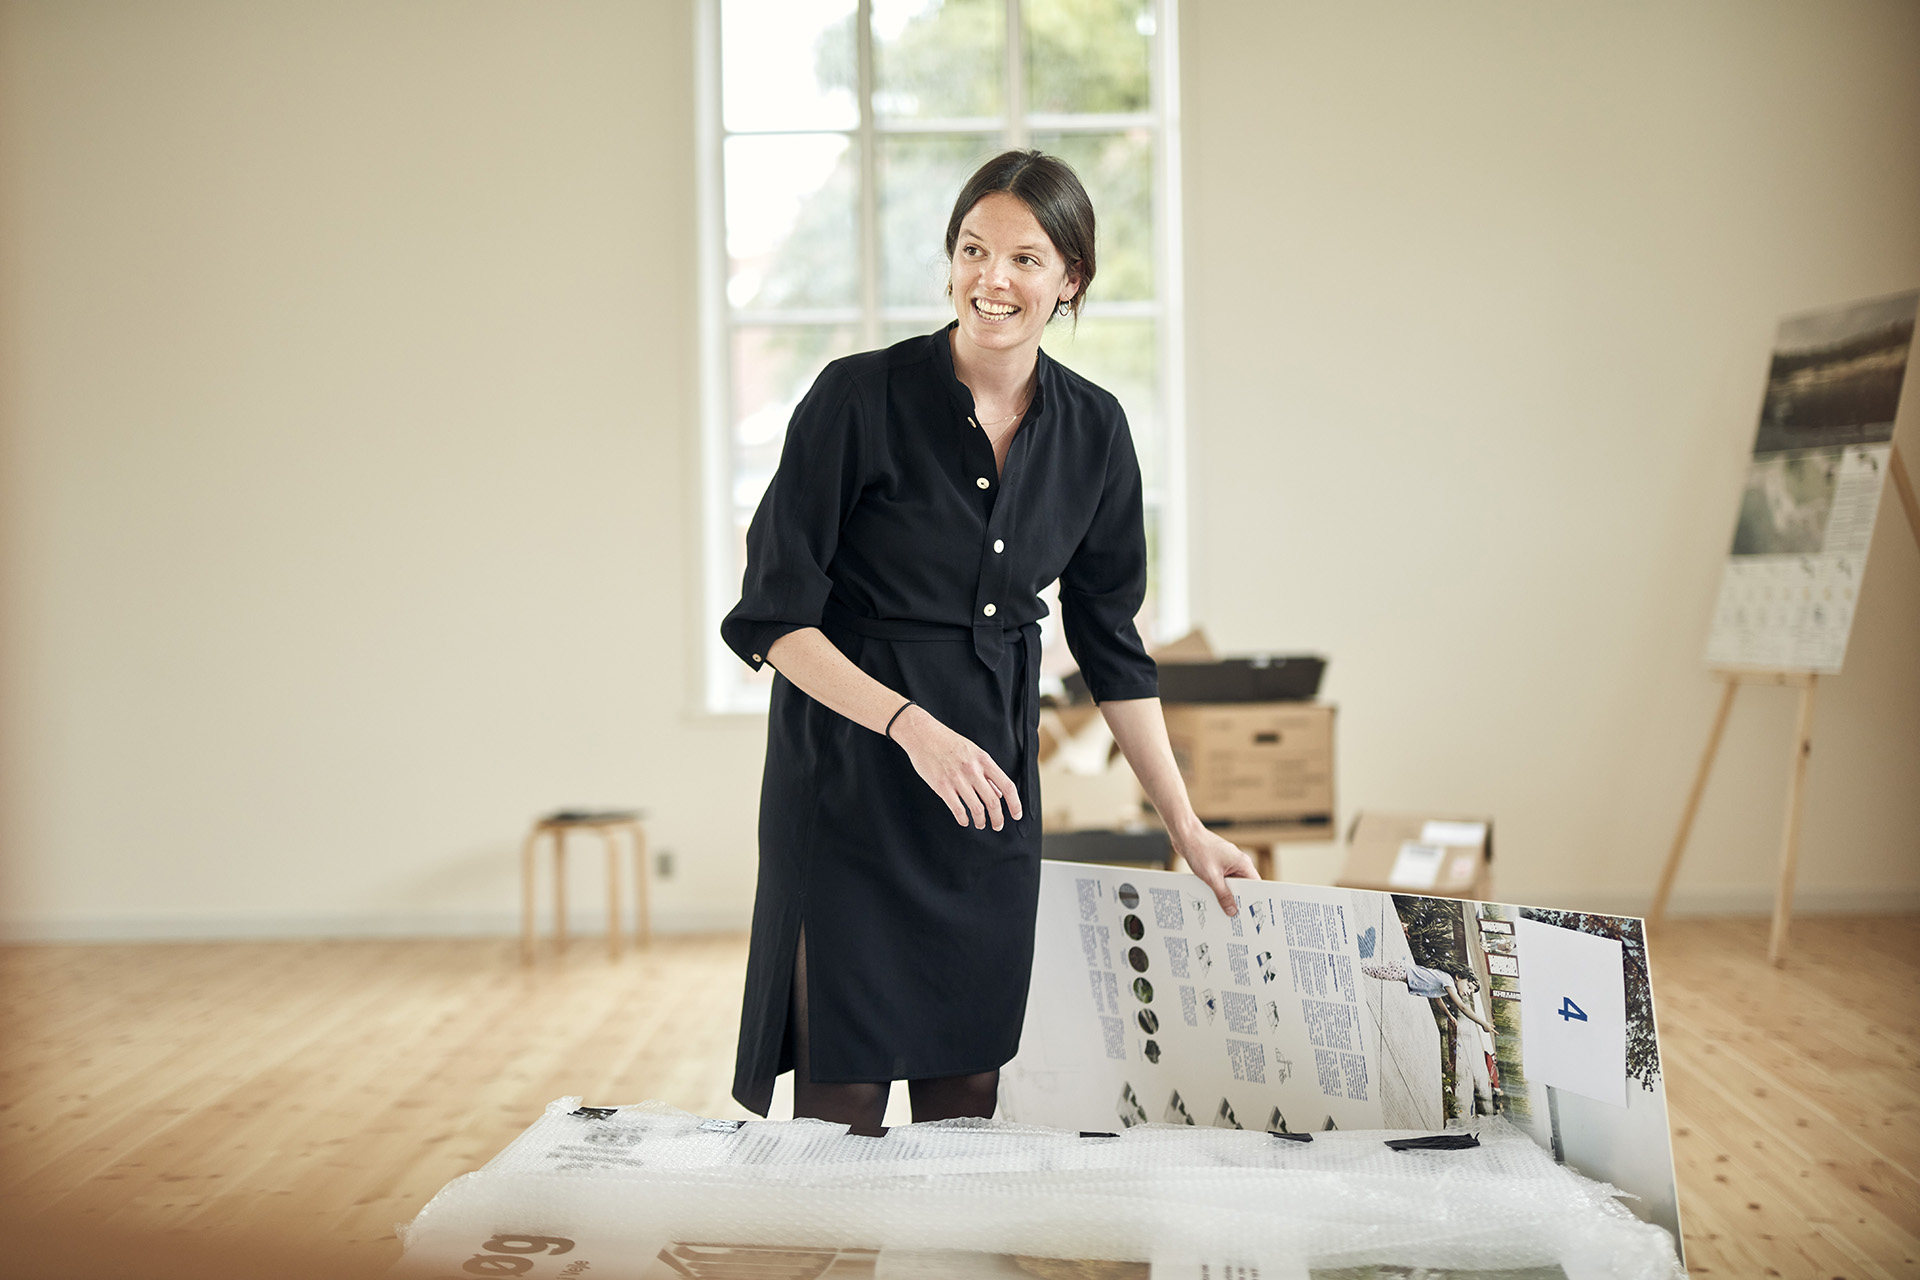 Architect Lotta Tiselius works as a project developer in Vejle Municipality, where they have just arranged an idea competition on urban development and storm surge protection of the future.